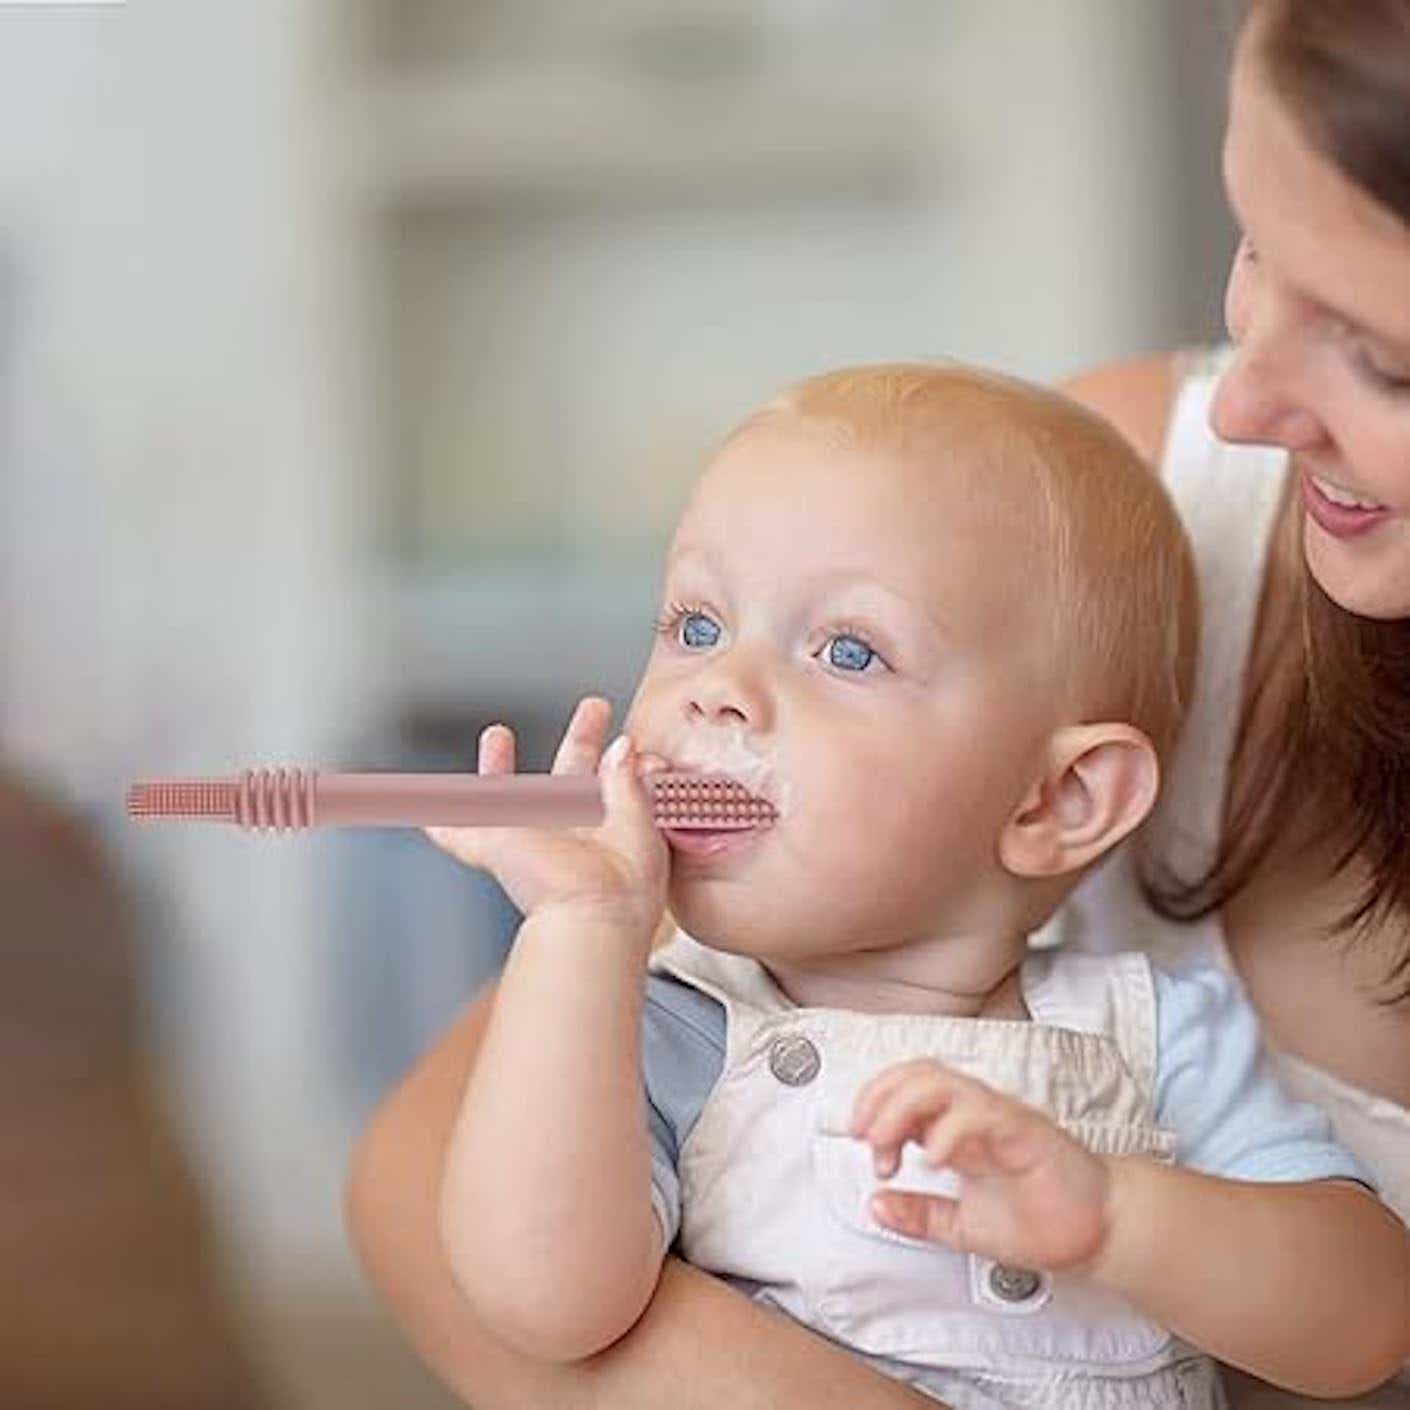 A baby teething on a silicone tube.